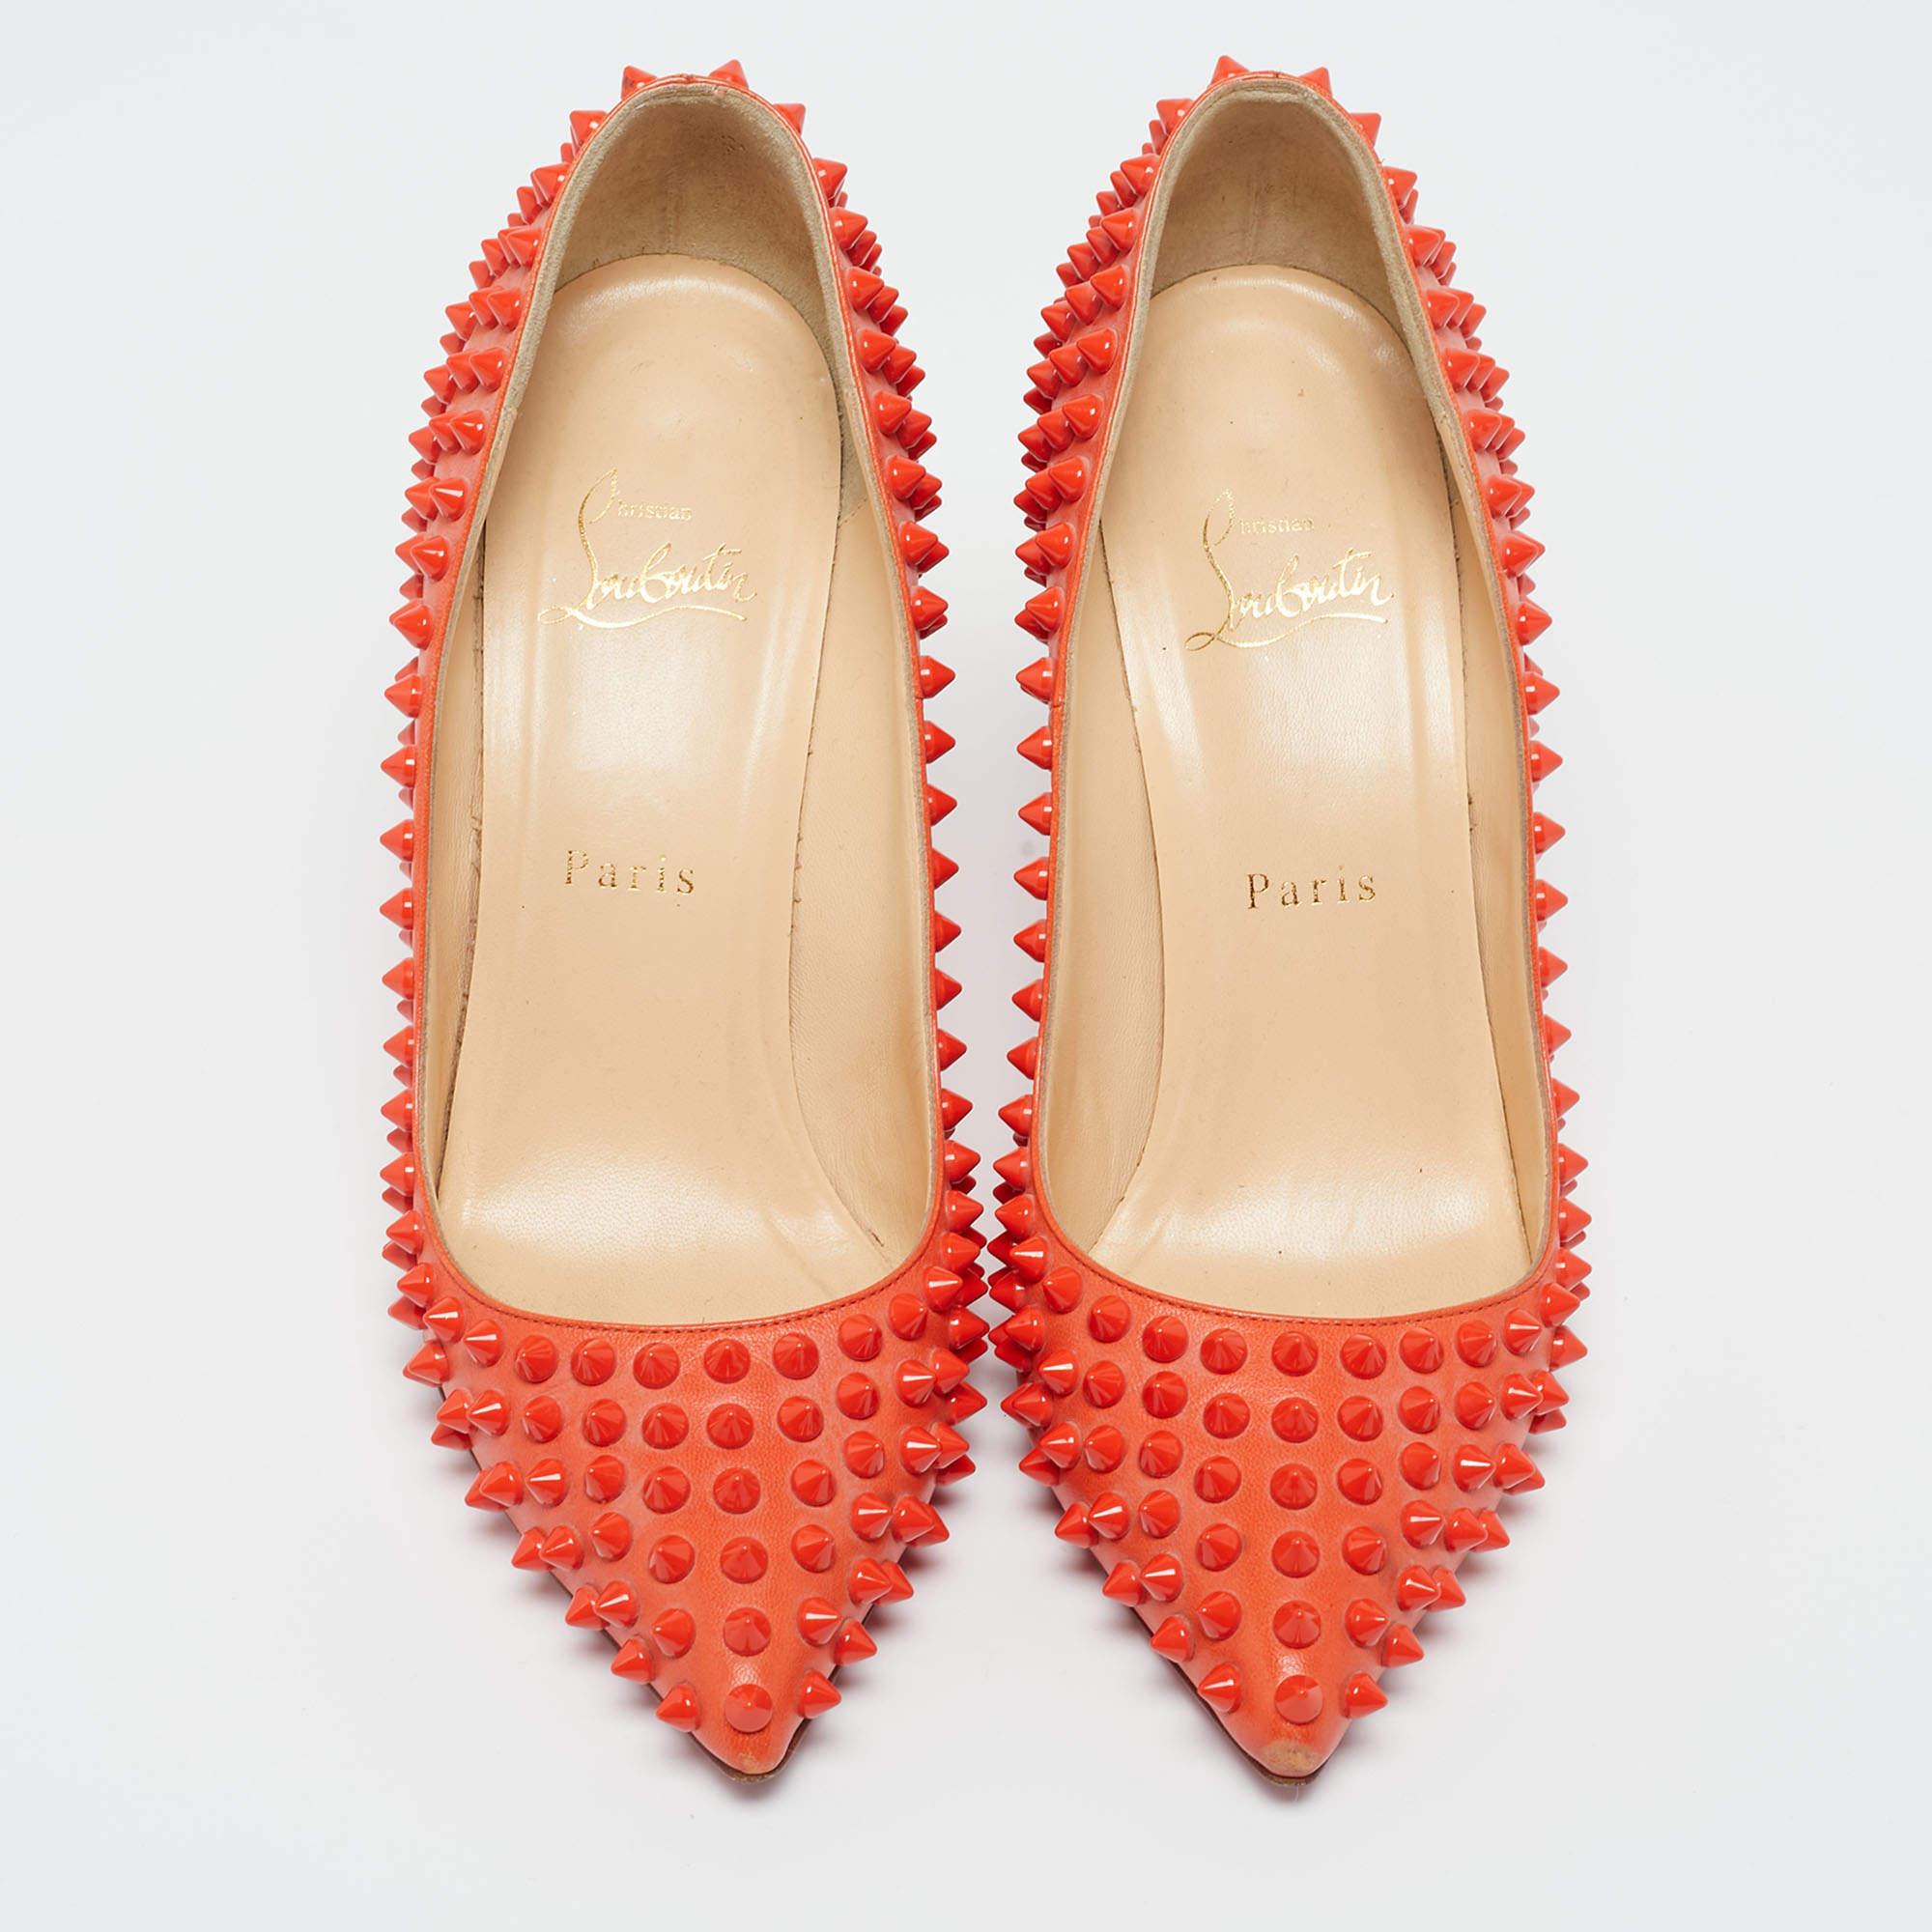 Christian Louboutin Orange Leather Pigalle Spikes Pumps Size 37.5 1